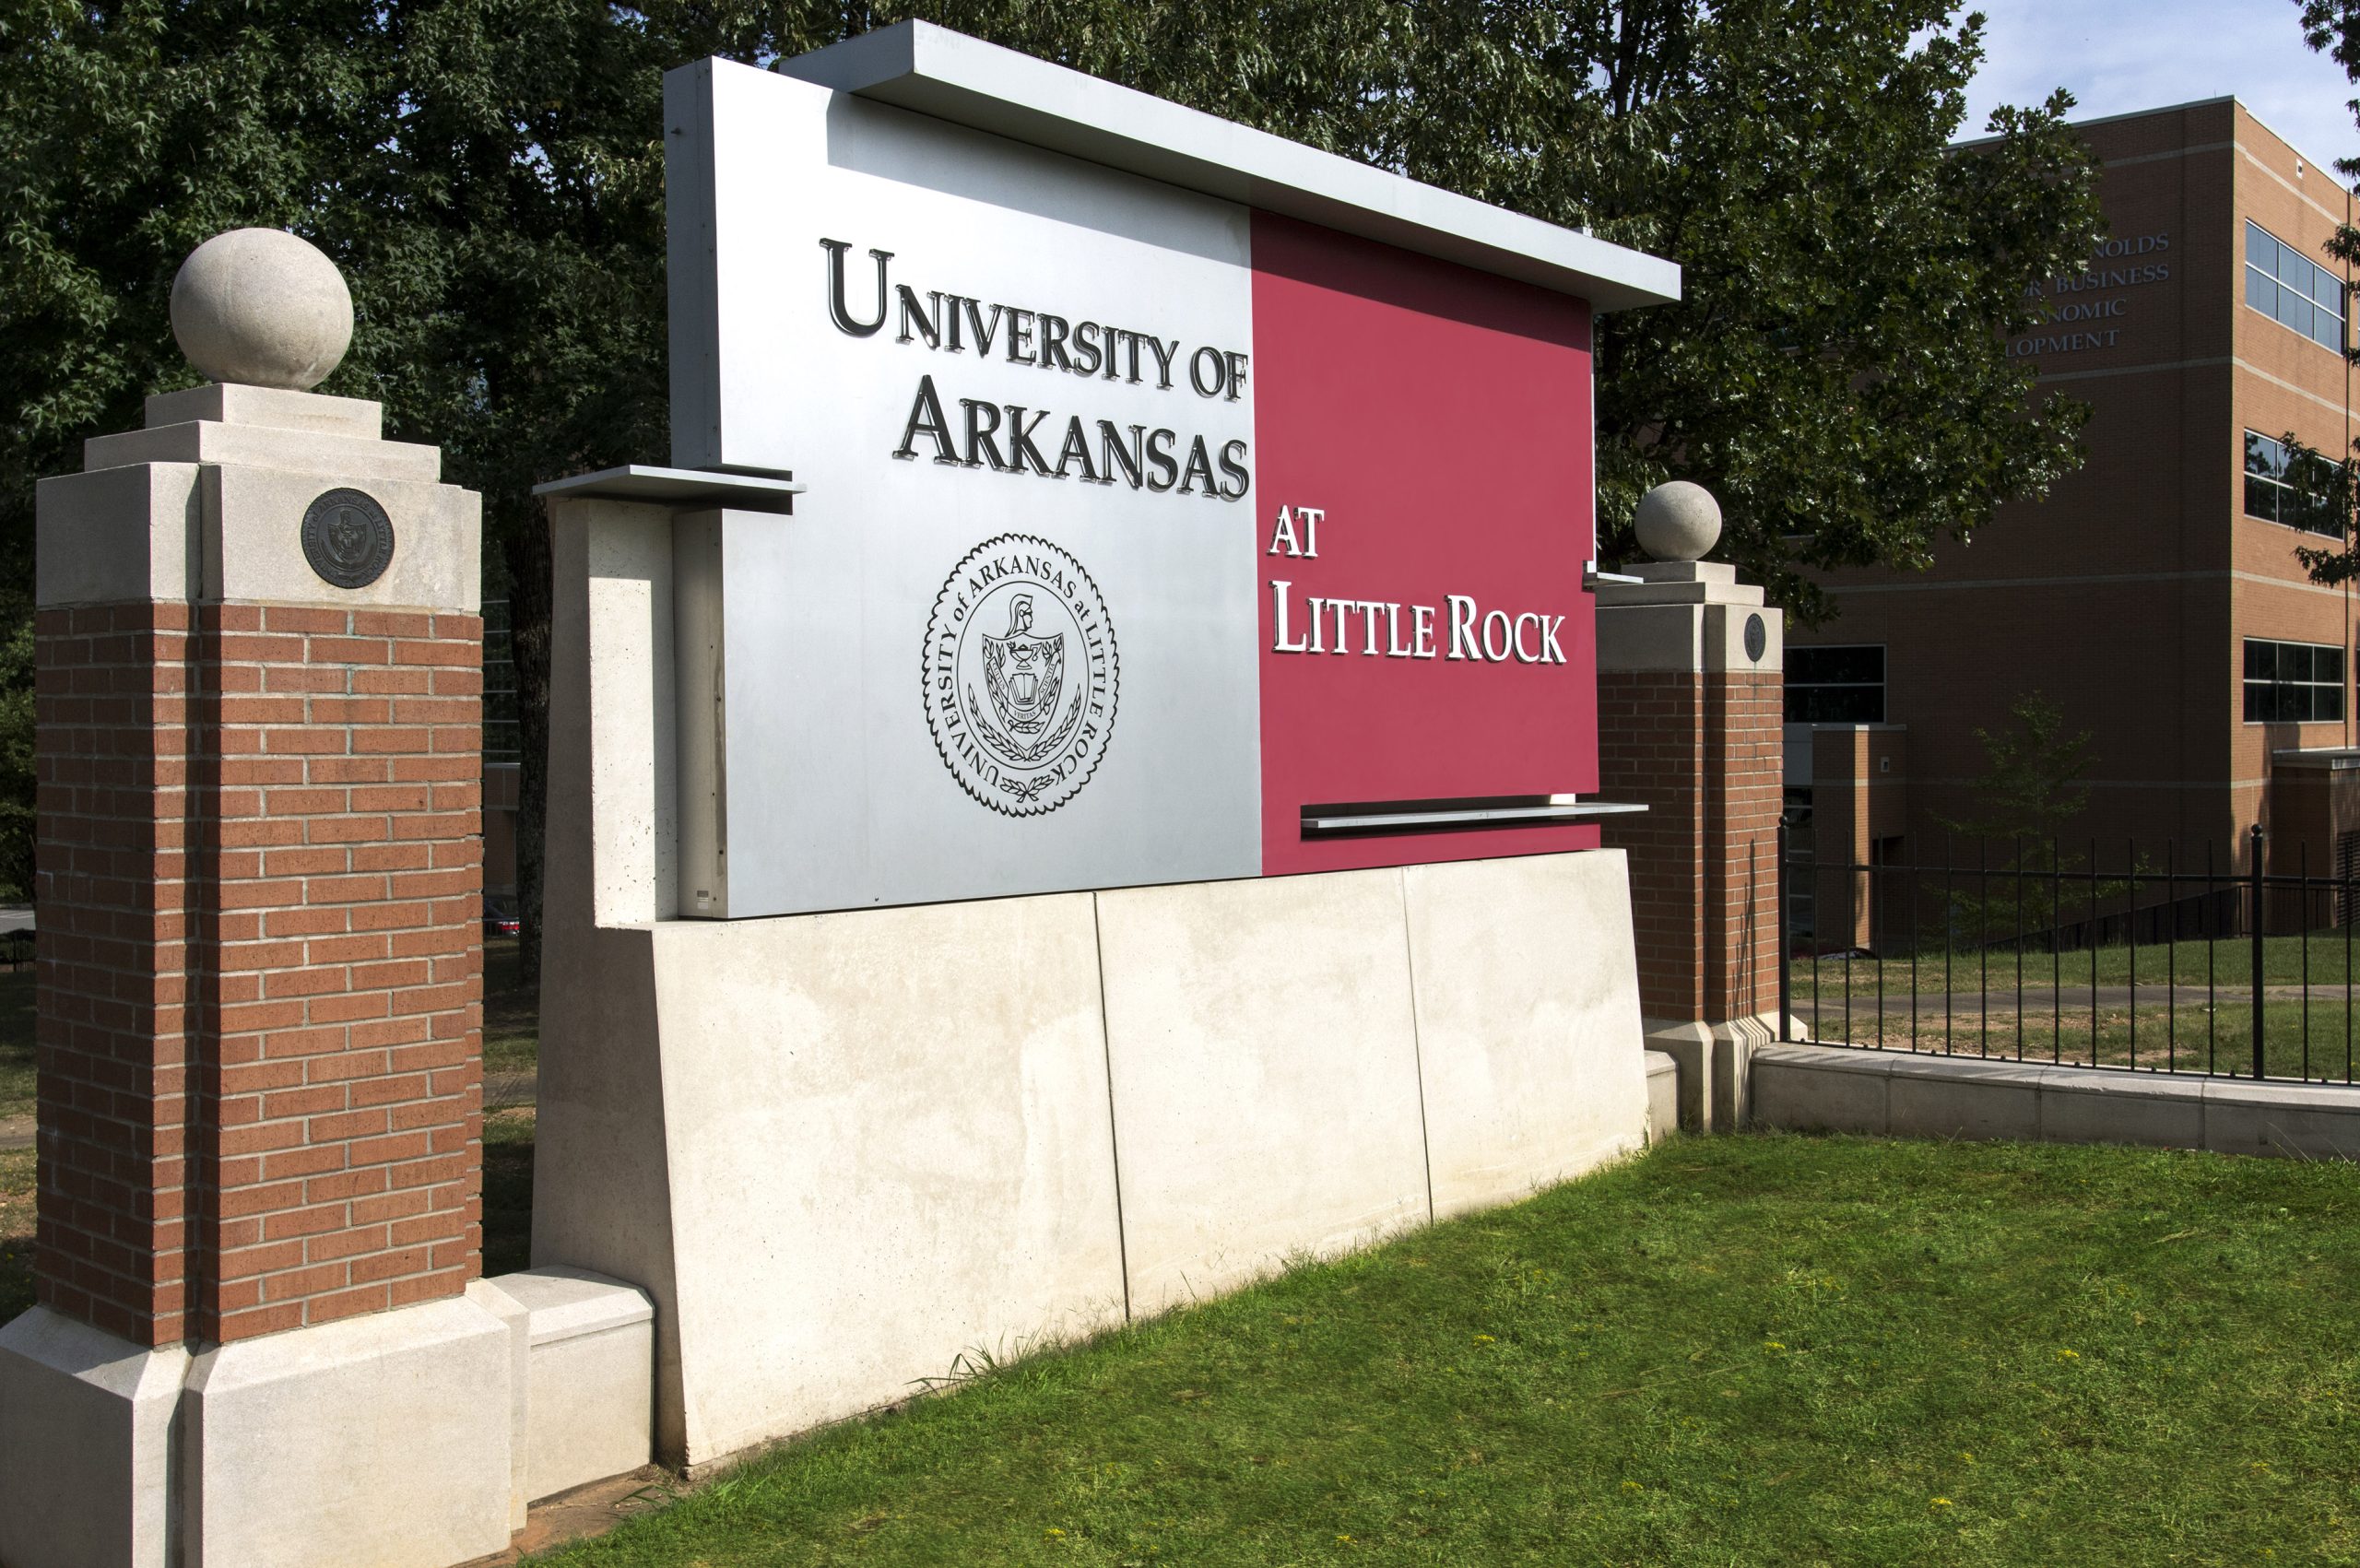 An image of a sign that says University of Arkansas at Little Rock with the university's seal. The left side is grey, and the right side is red with two posts on either side.